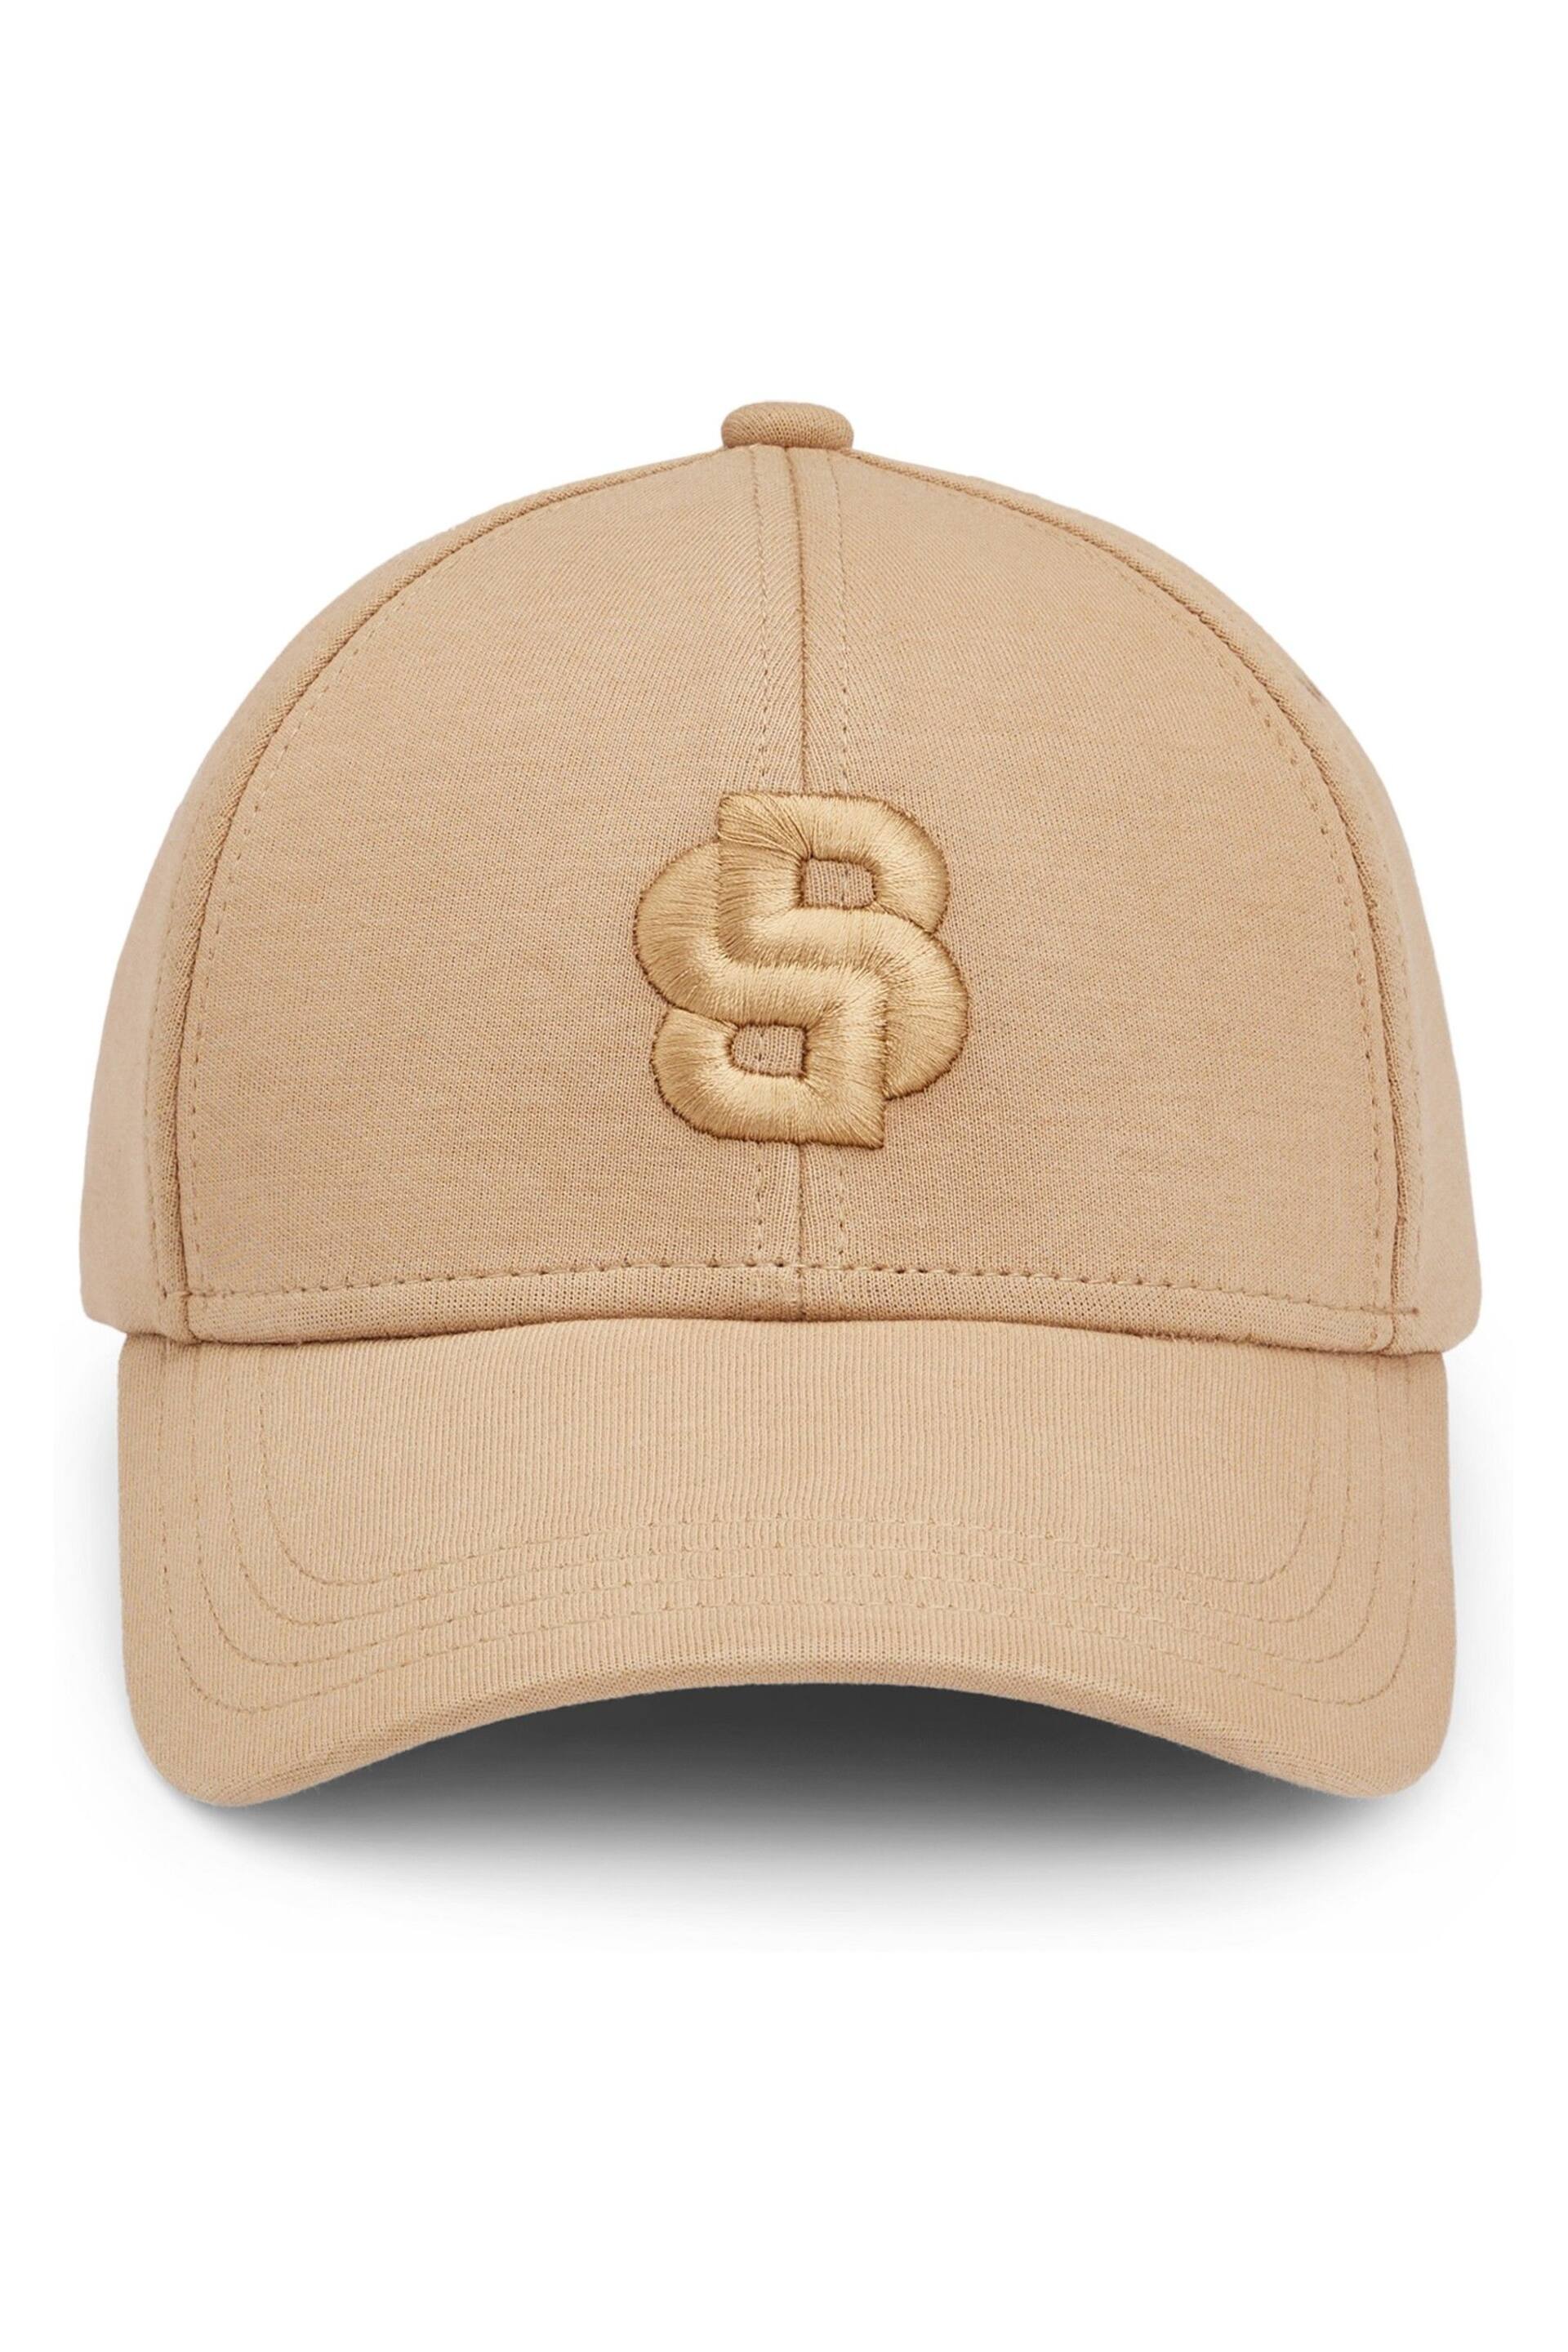 BOSS Natural Cotton-Blend Cap With Embroidered Double Monogram - Image 4 of 4